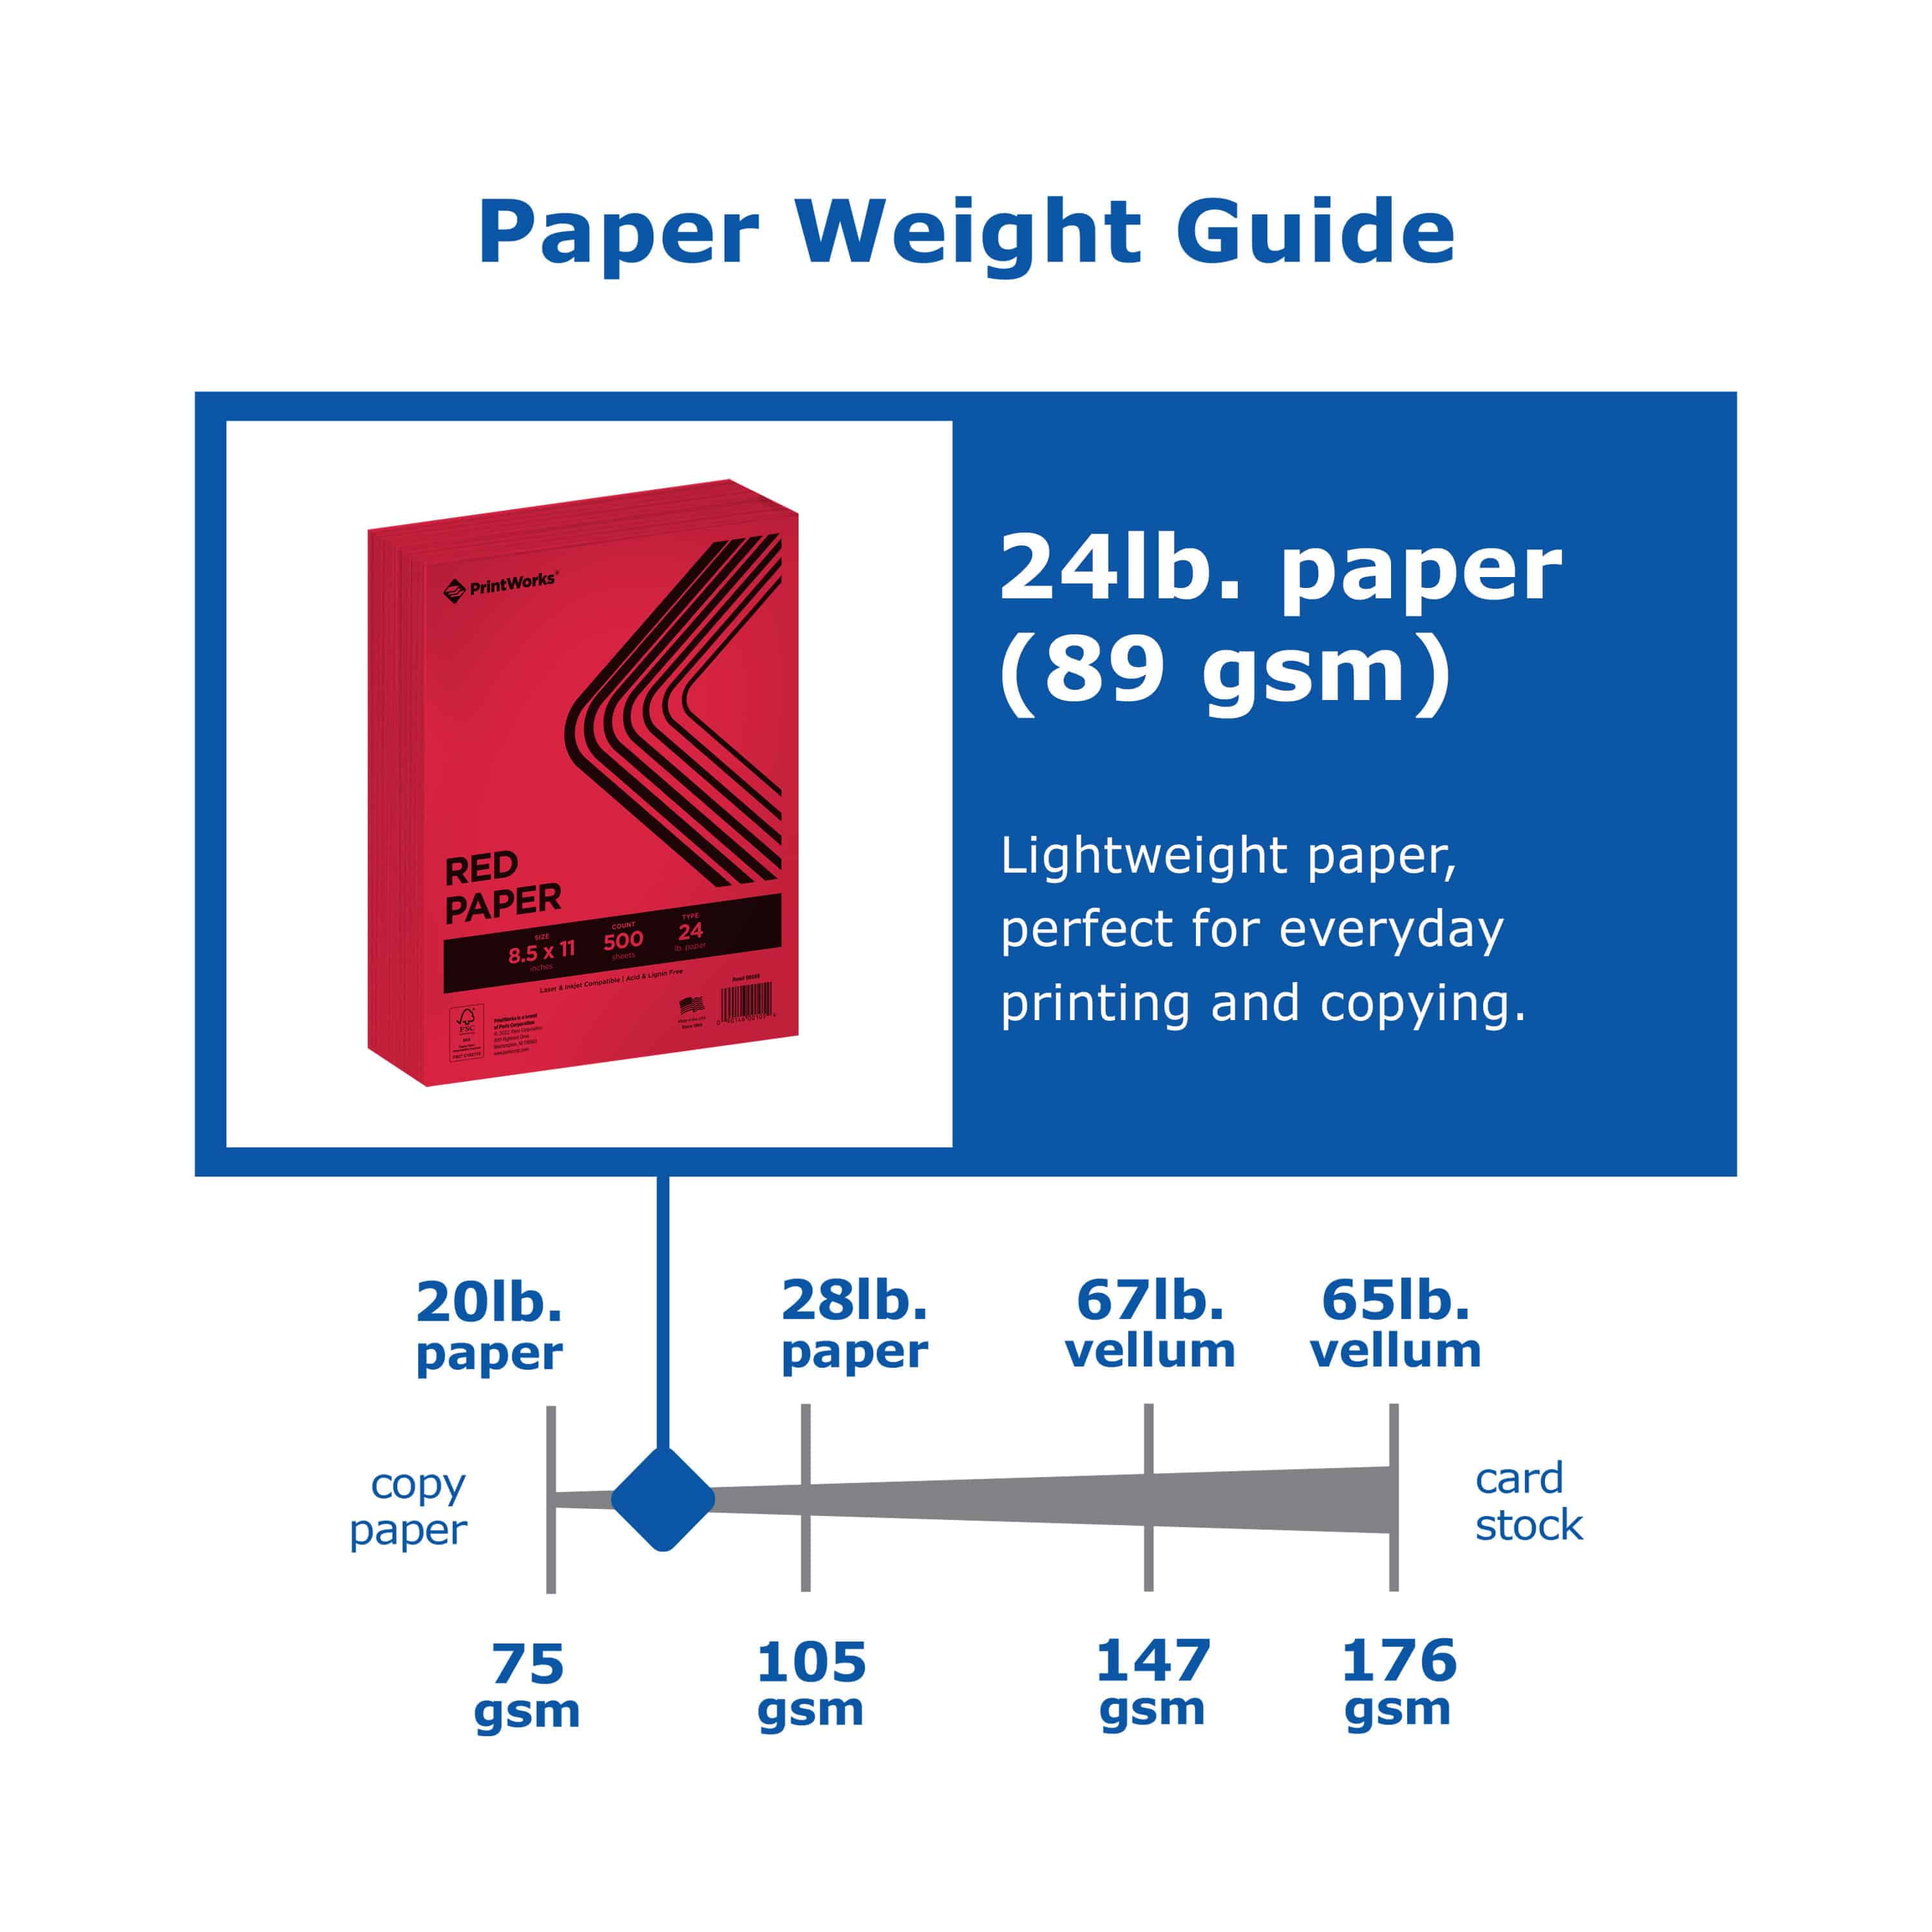 A4 Red Colour Paper 80gsm Sheets Double Sided Printer Paper Copier Origami Flyers Drawing School Office Printing 210mm x 297mm (A4 Red Paper - 80gsm